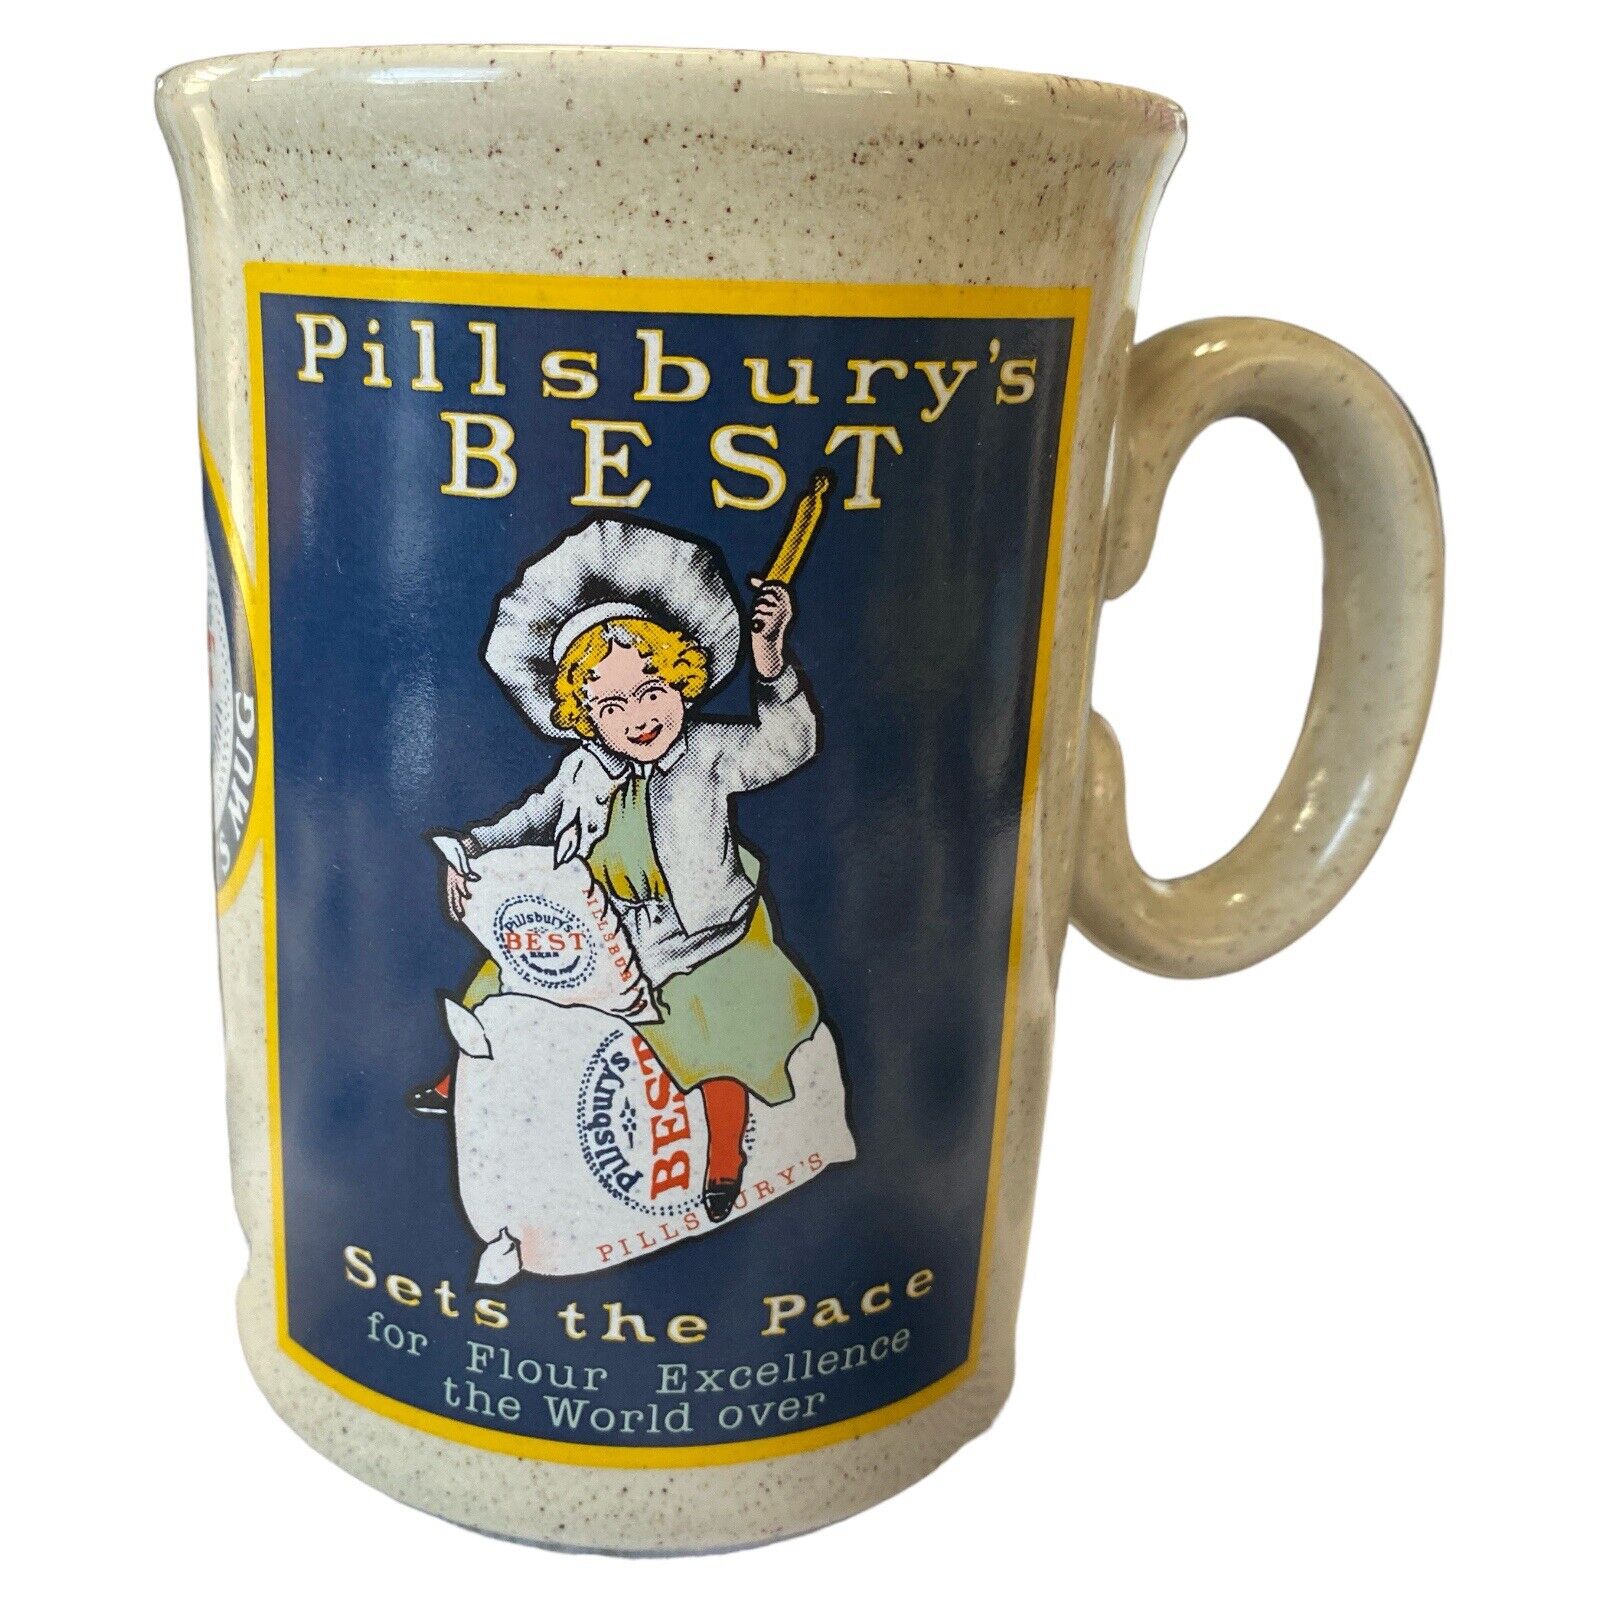 1986 Vintage PILLSBURY'S BEST Sets the Pace for Flour Excellence COLLECTOR'S MUG